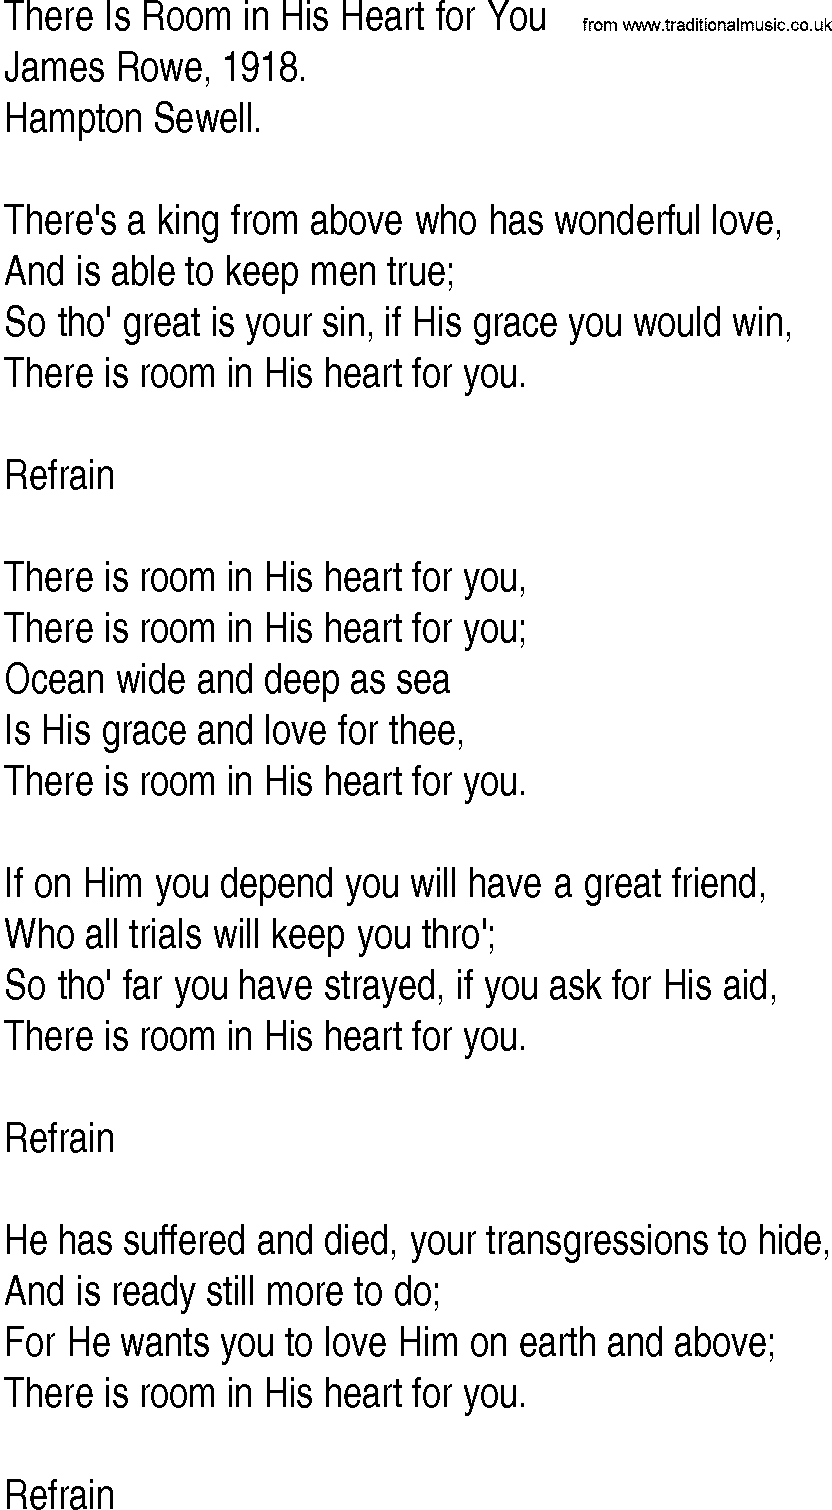 Hymn and Gospel Song: There Is Room in His Heart for You by James Rowe lyrics